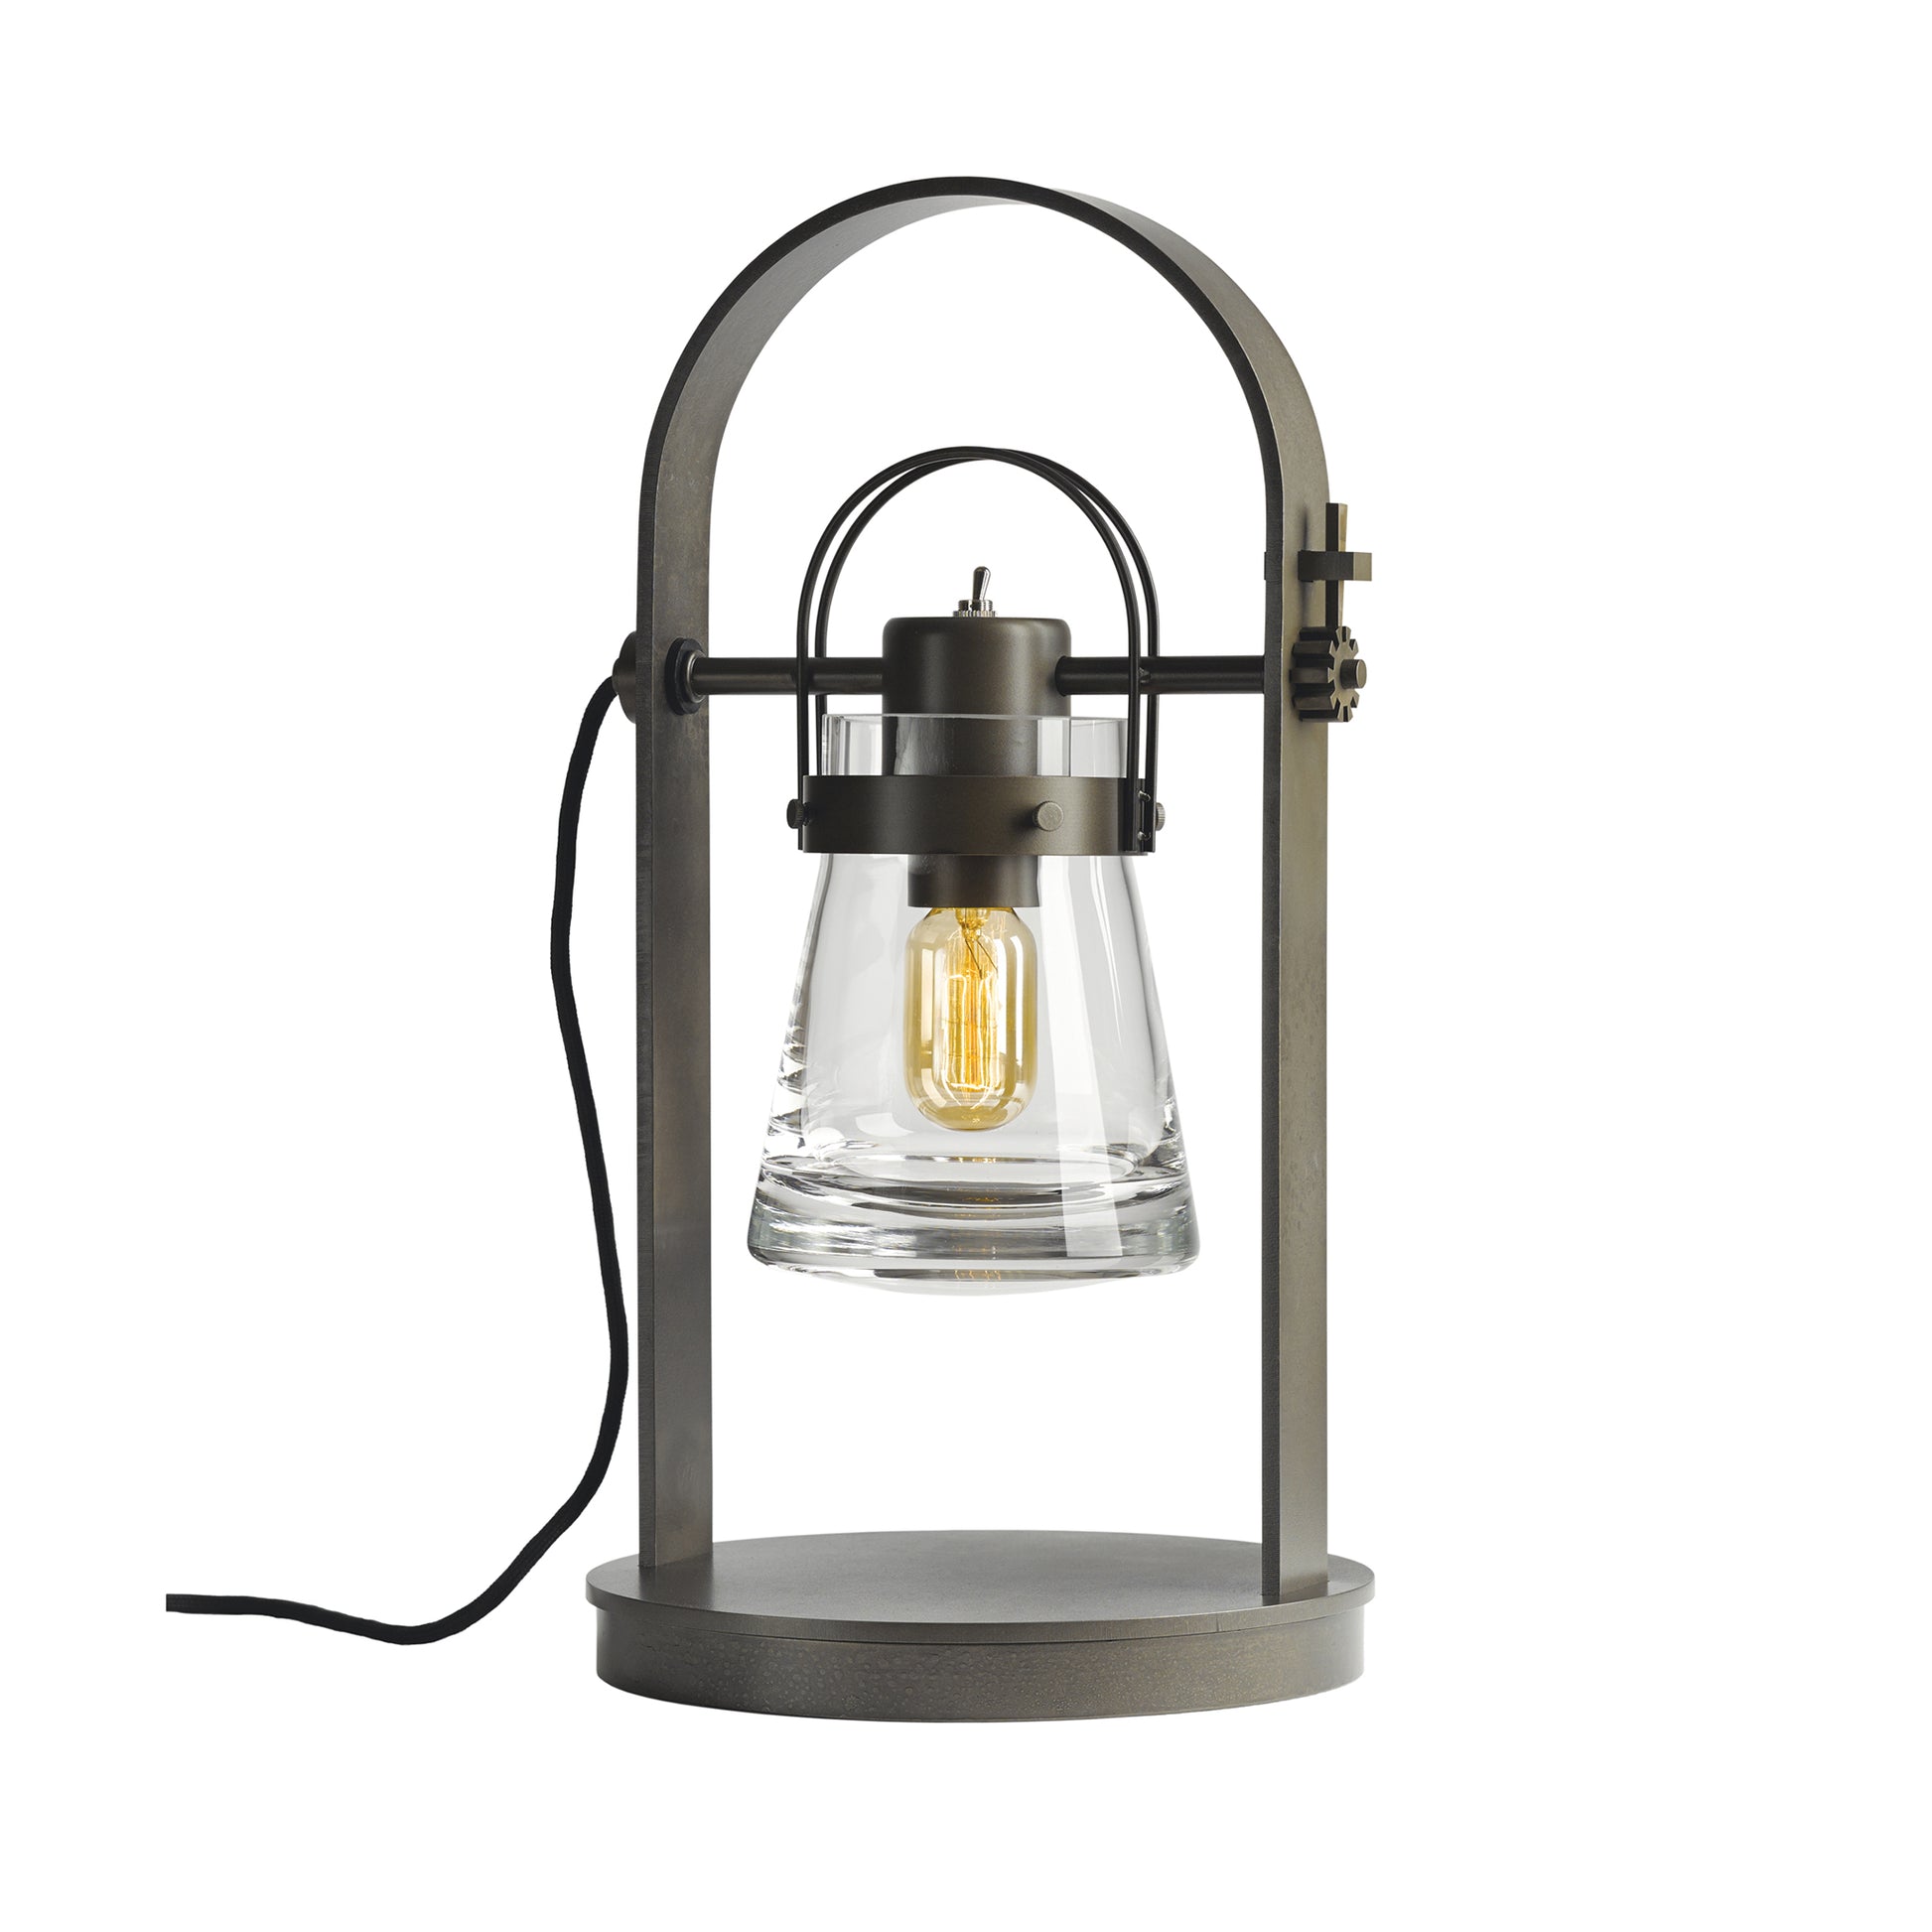 The Hubbardton Forge Erlenmeyer Table Lamp, designed with a steampunk twist, features a metal base and a glass shade.